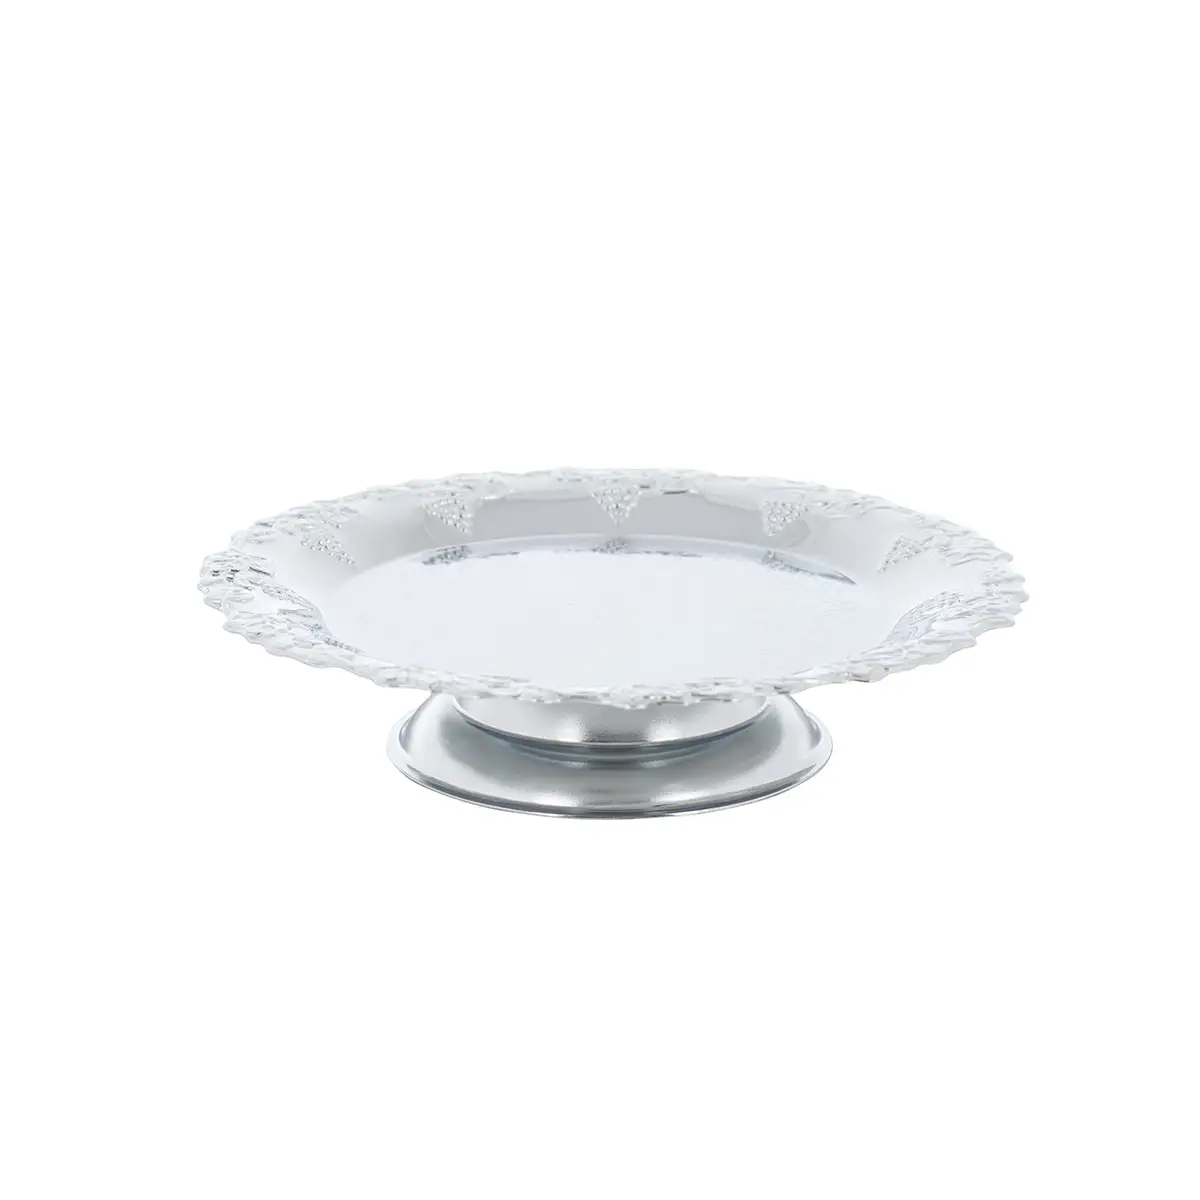 CHROME PLATED IRON TRAY WITH BASE. - TRAY